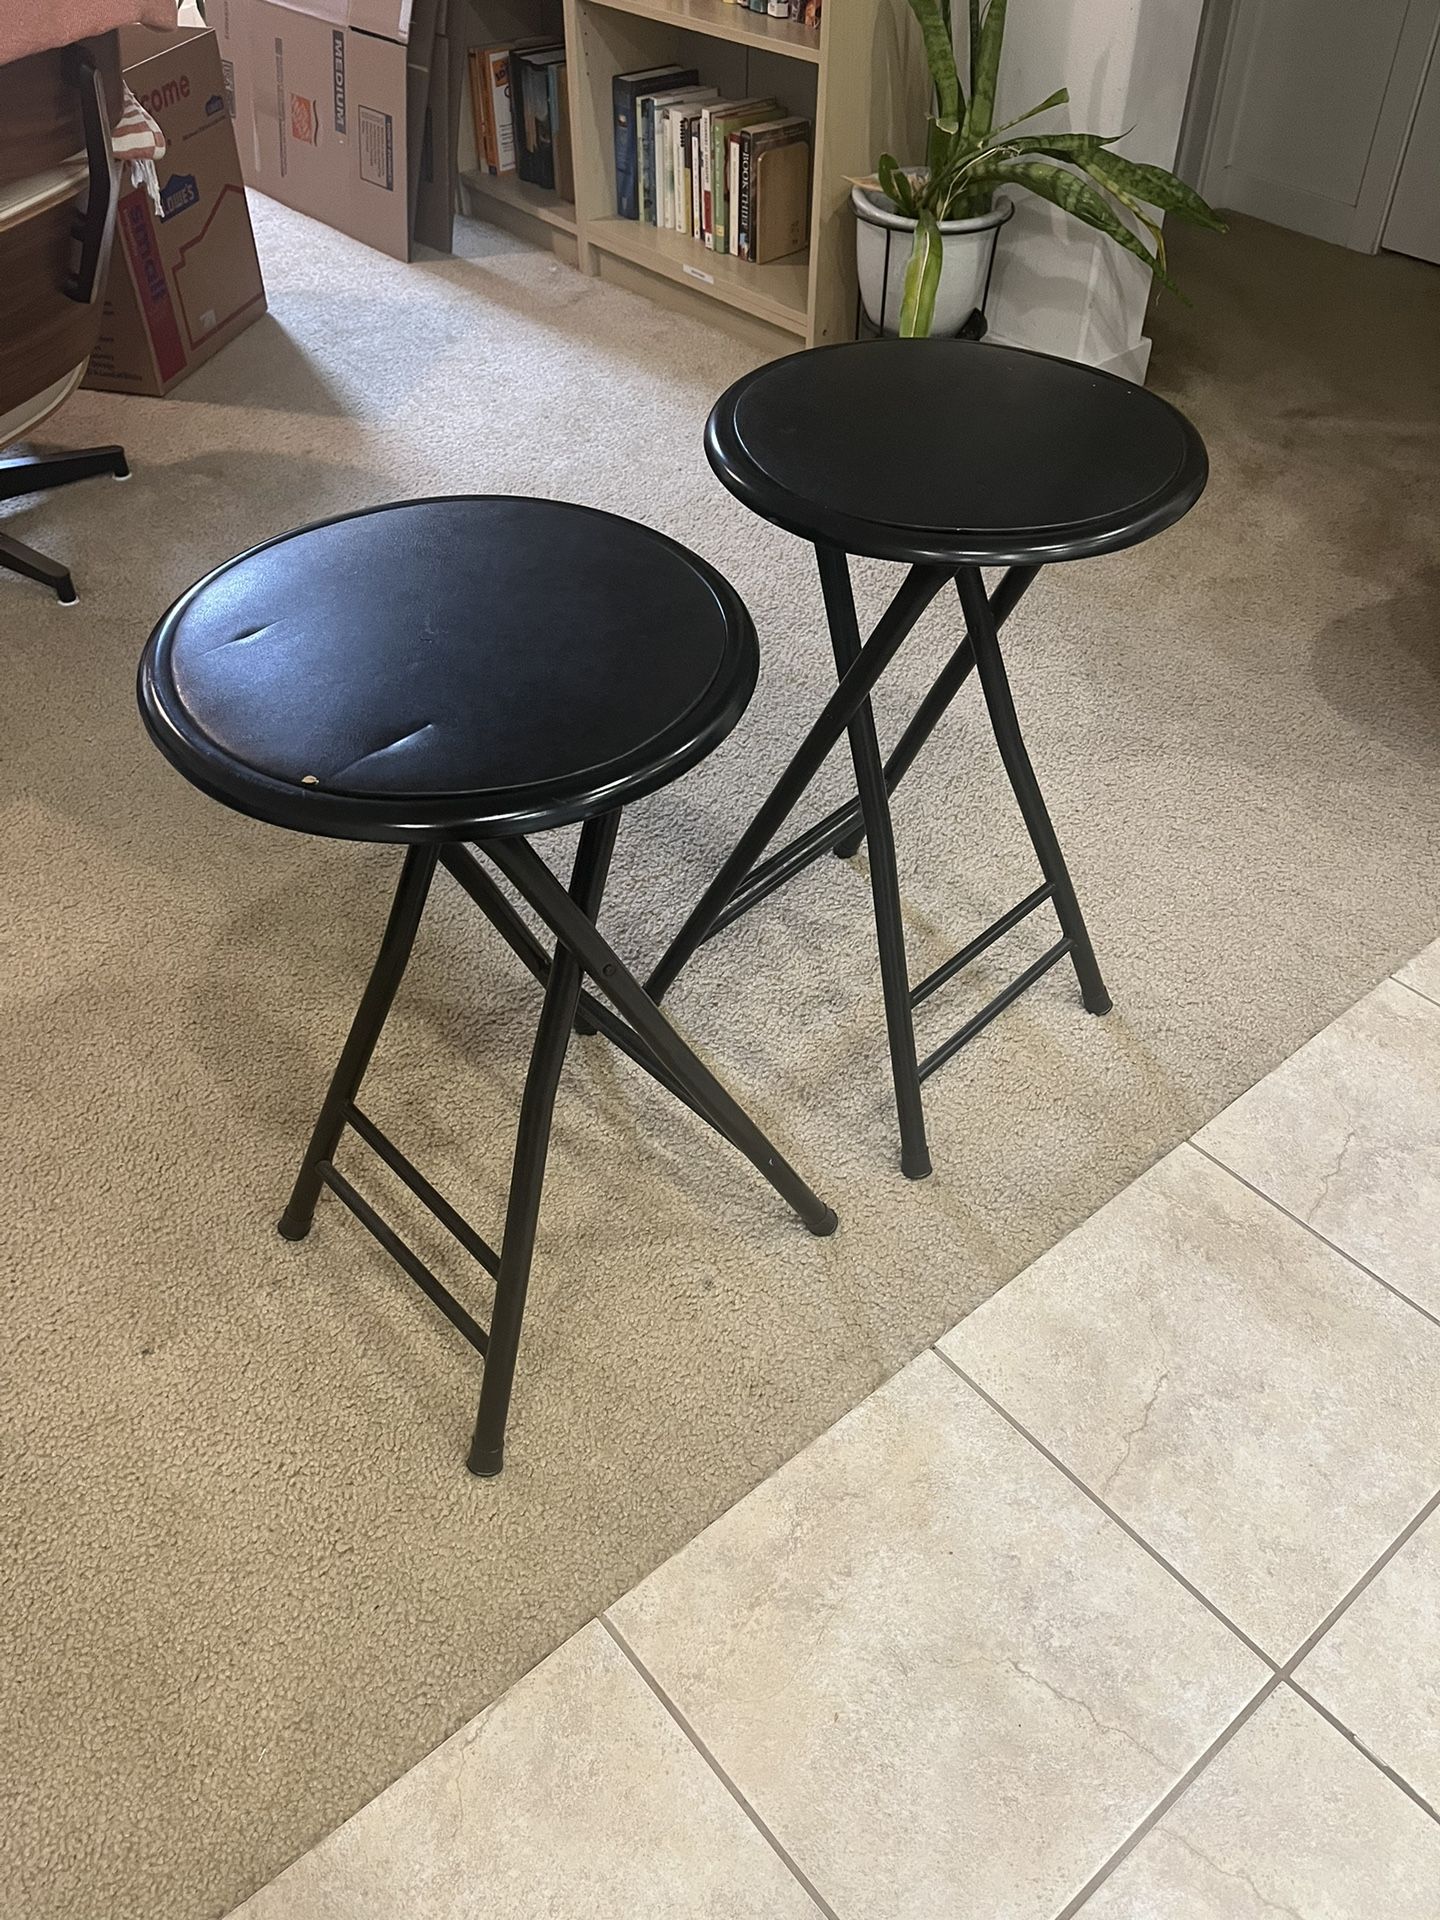 Two Counter Height Folding Stools